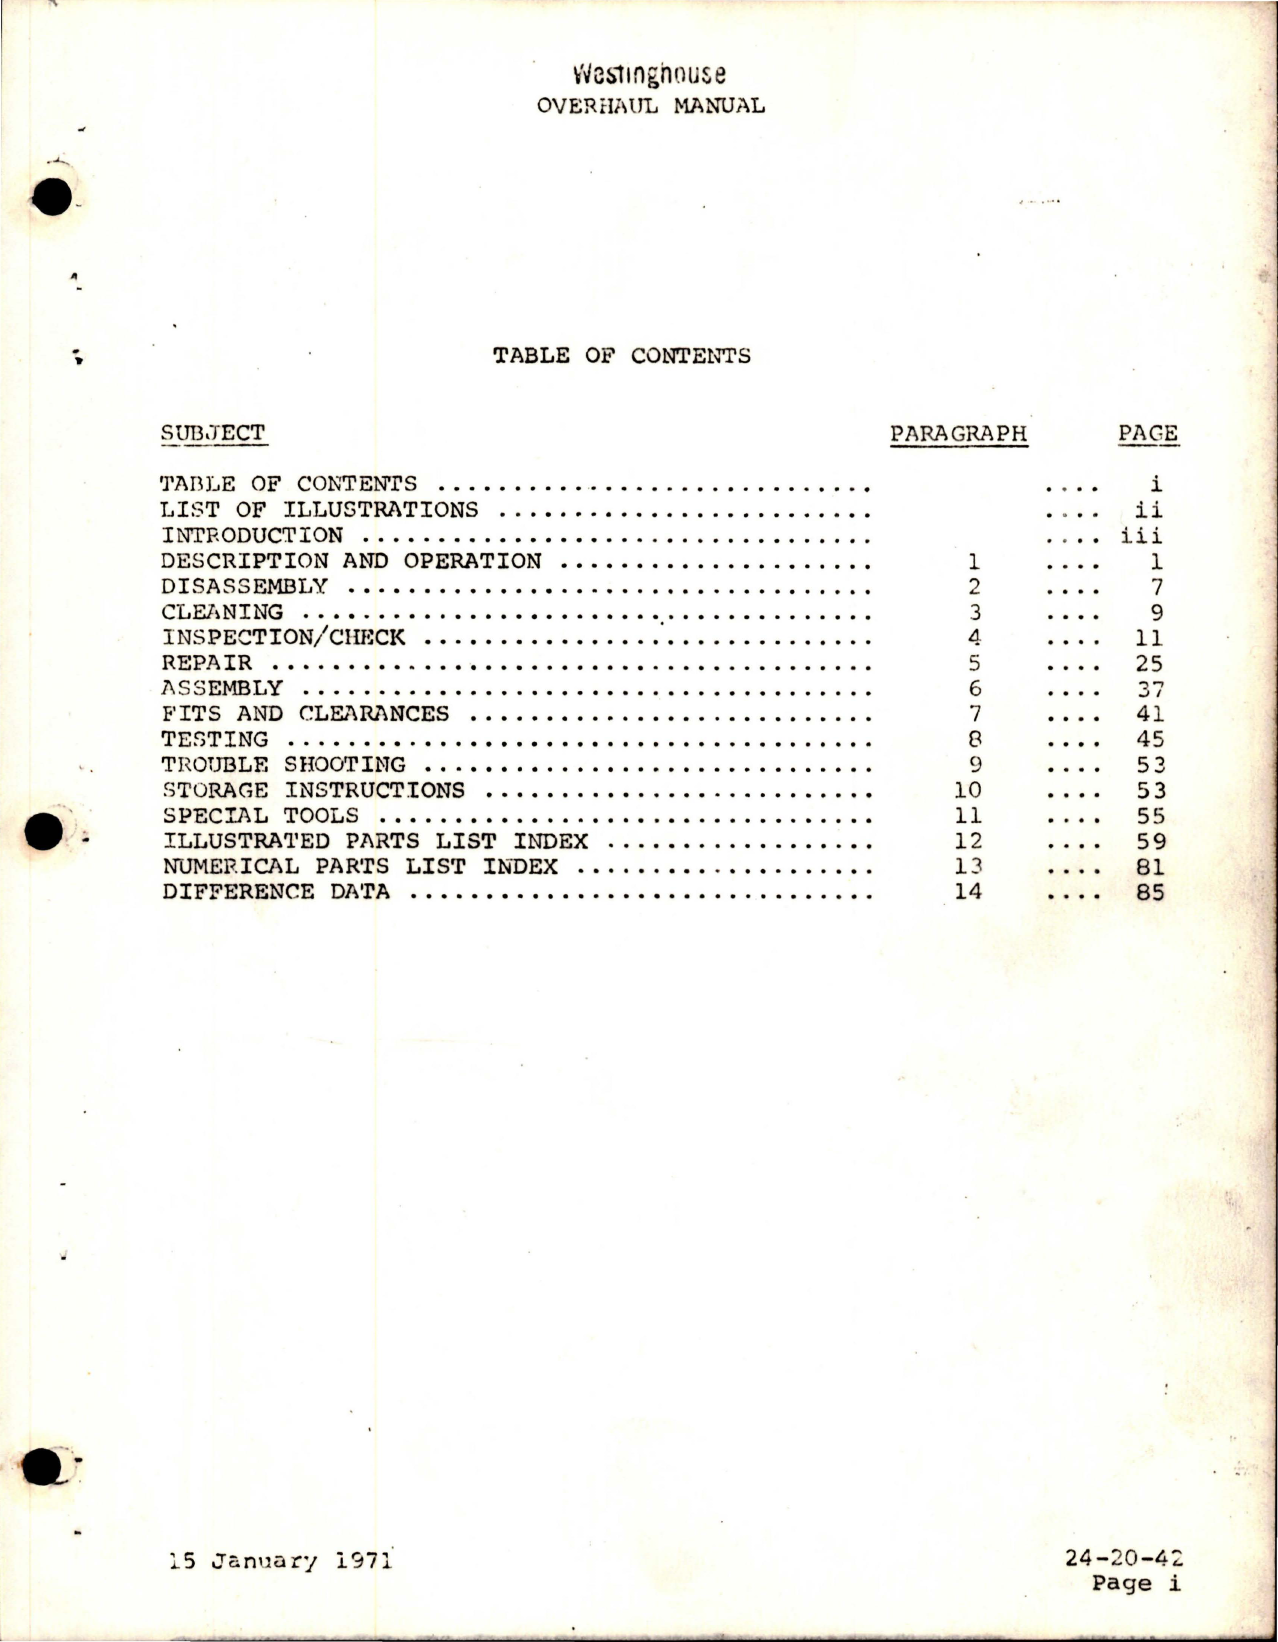 Sample page 5 from AirCorps Library document: Overhaul Manual for AC Generator - Part 976J119 Series